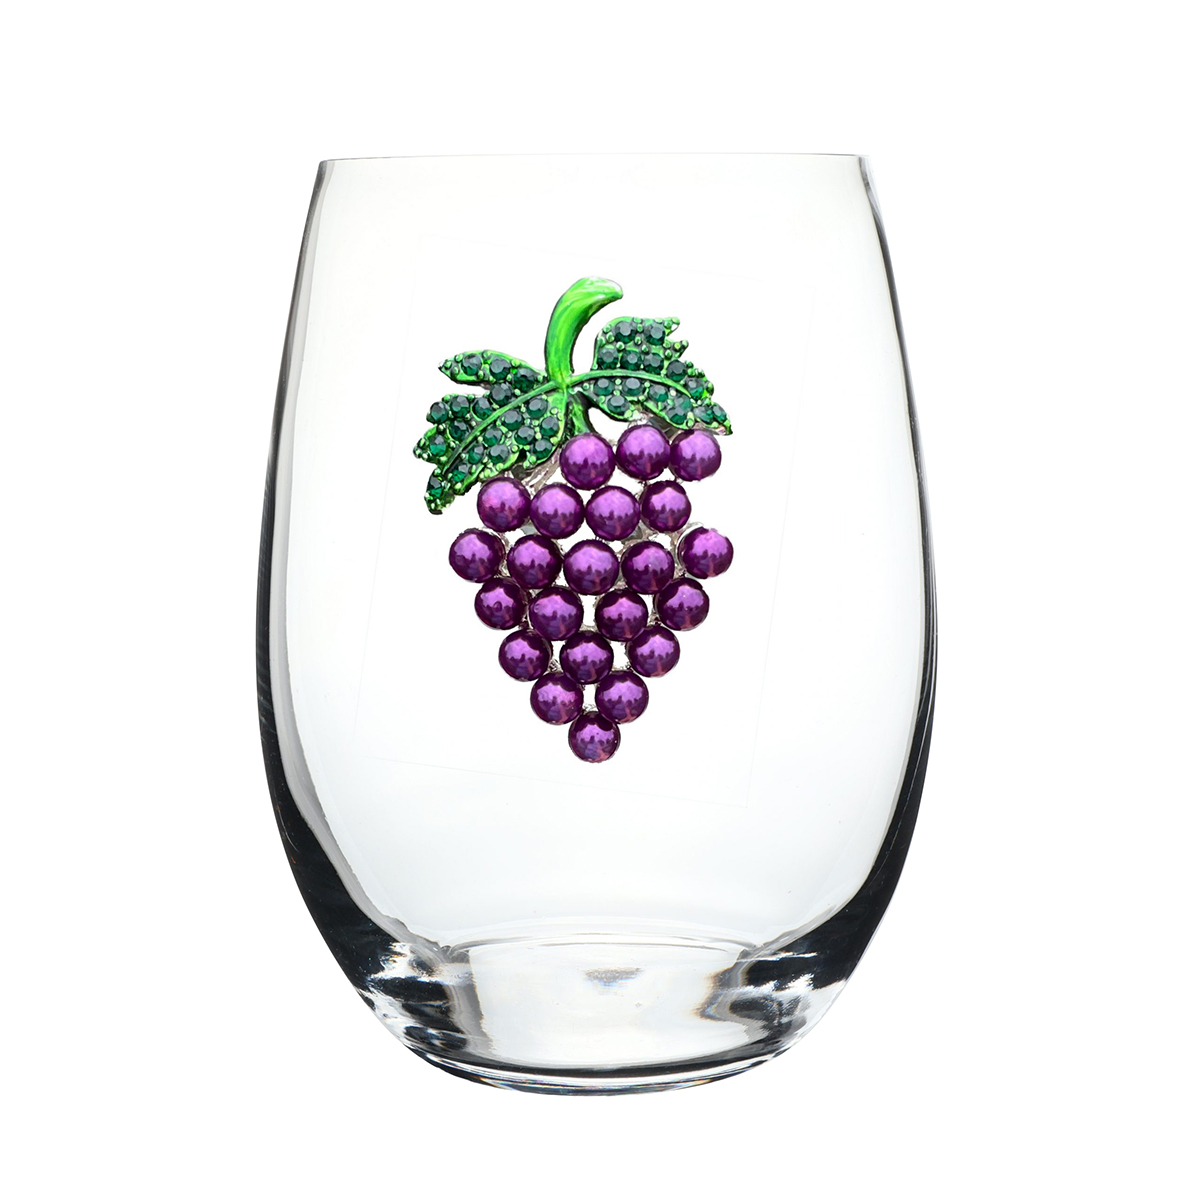 The Queens' Jewels Grapes Jeweled Glassware